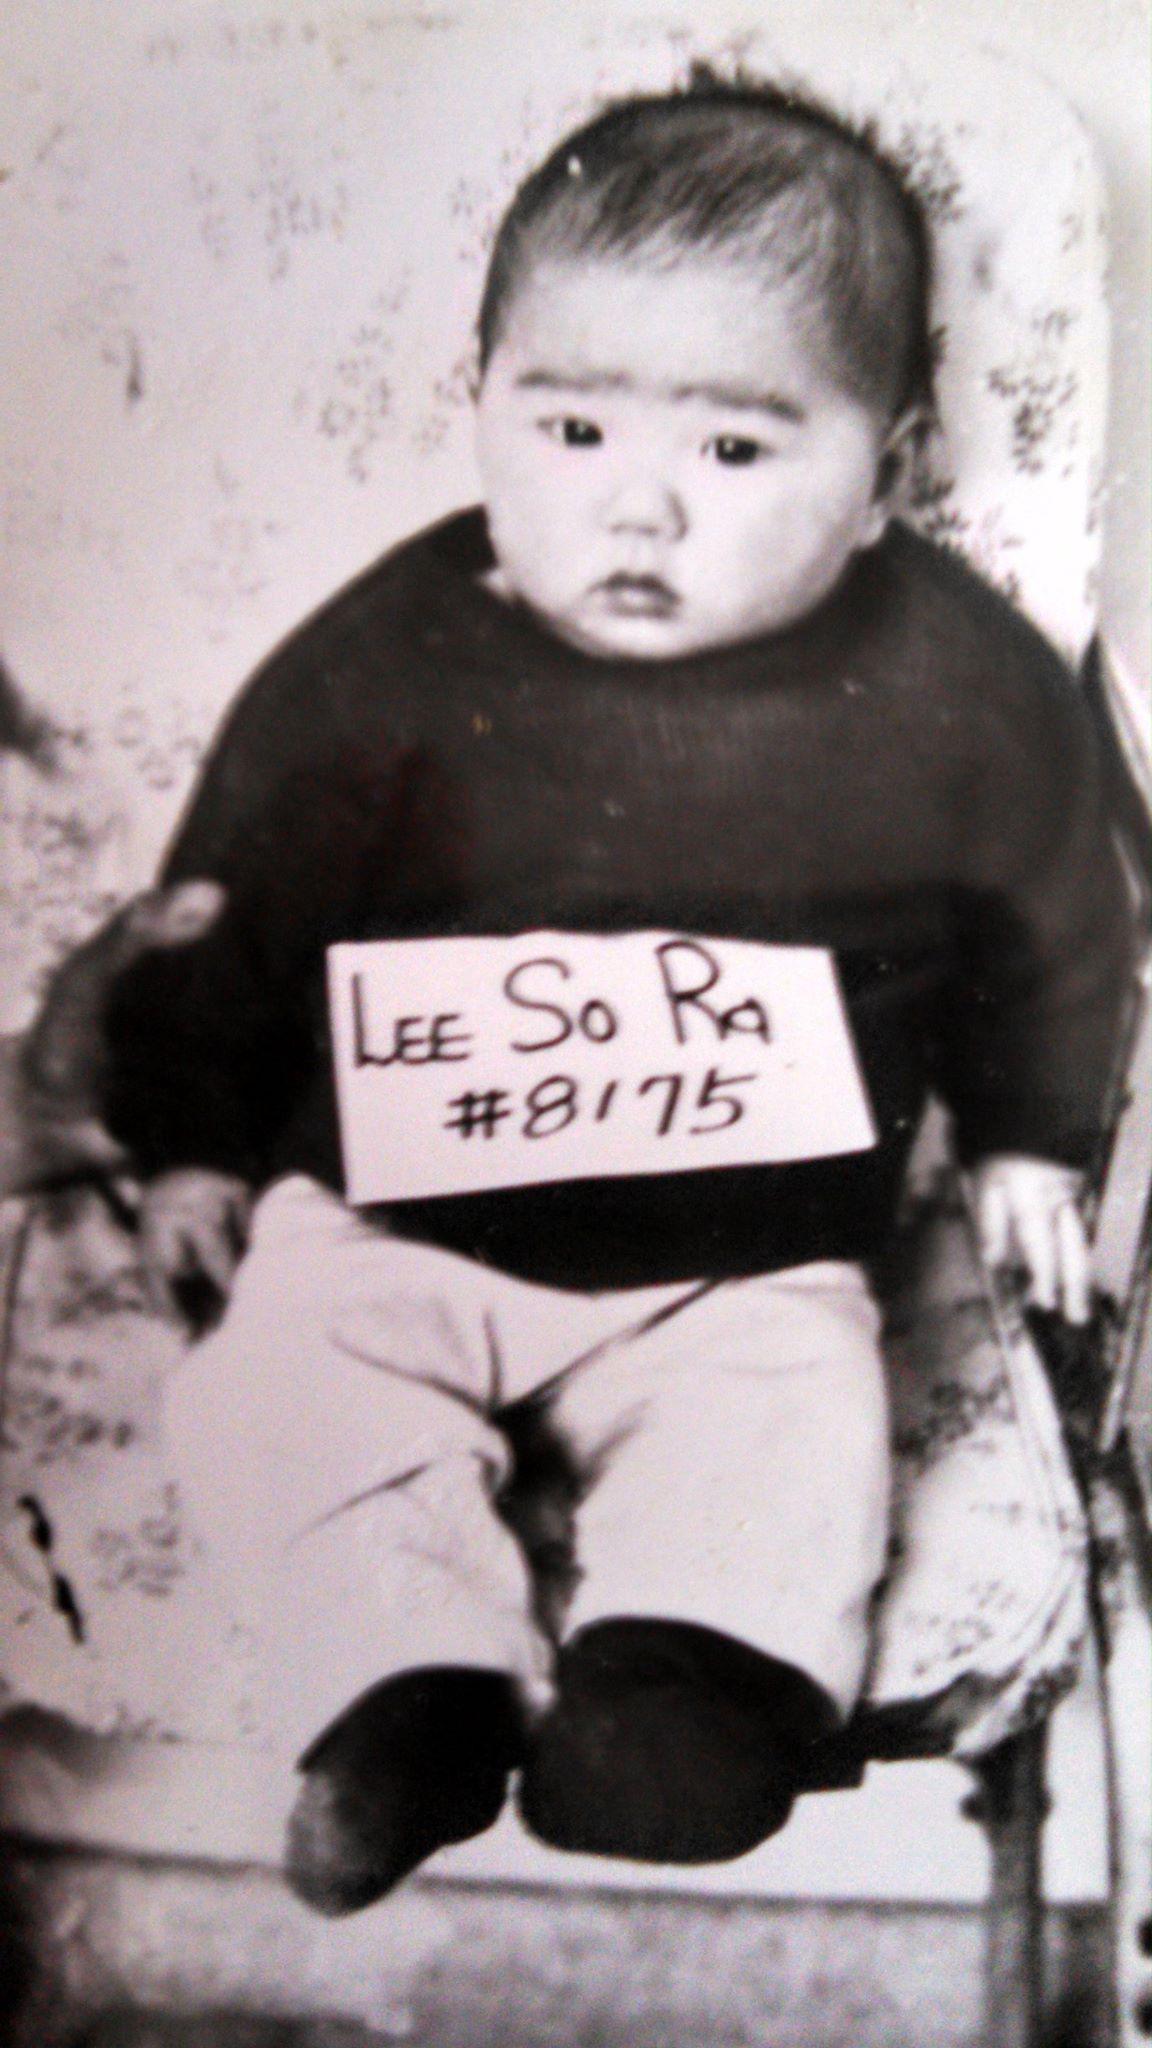 My adoption photo in Korea, with my adoption number #8175.